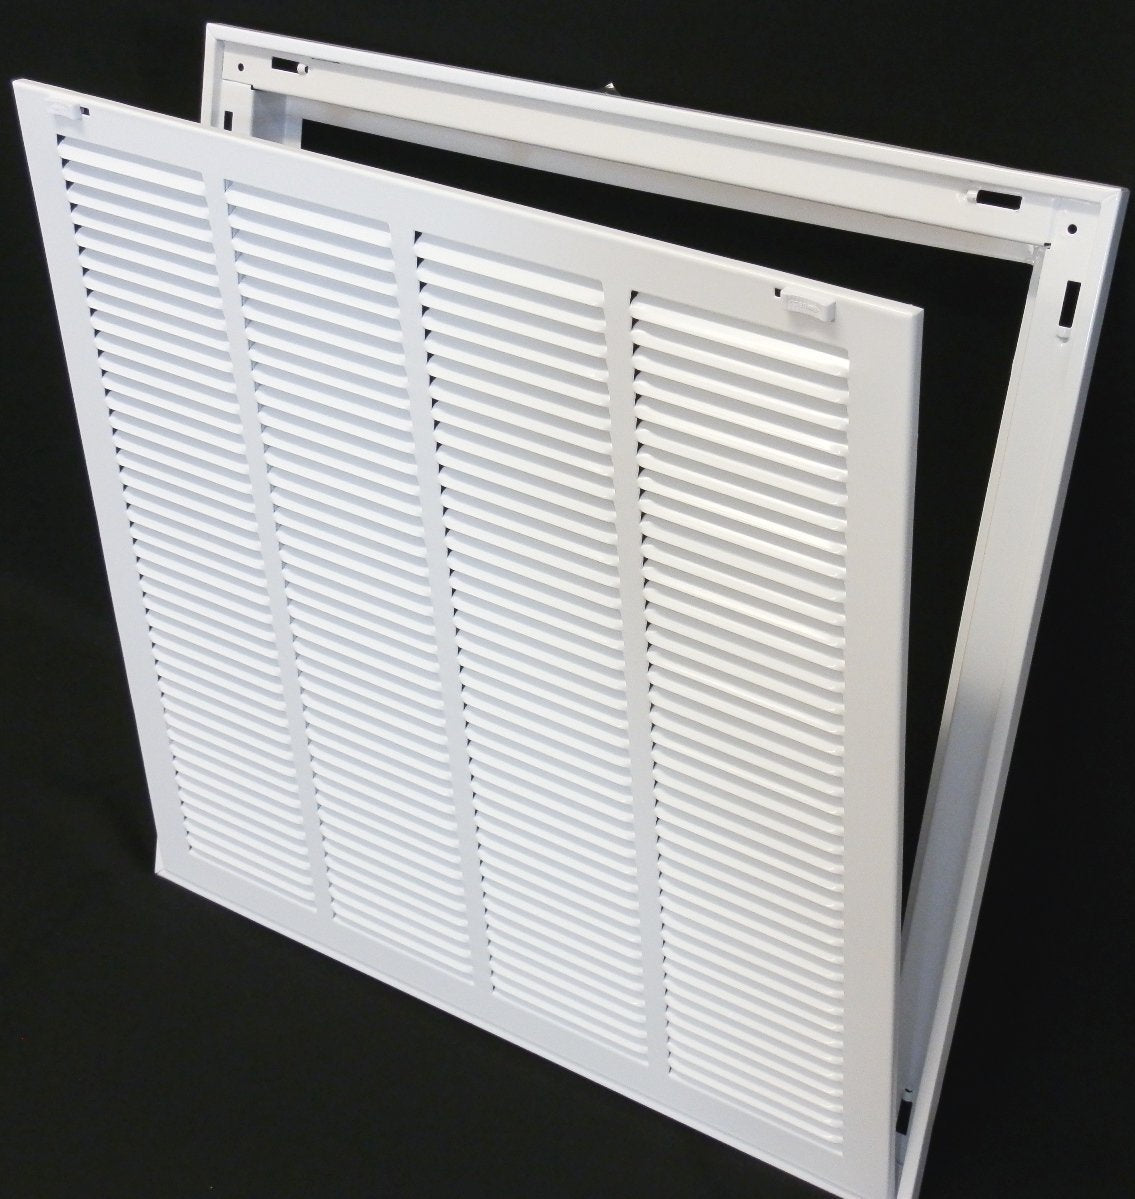 25&quot; X 6&quot; Steel Return Air Filter Grille for 1&quot; Filter - Removable Frame - [Outer Dimensions: 27 5/8&quot; X 8 5/8&quot;]